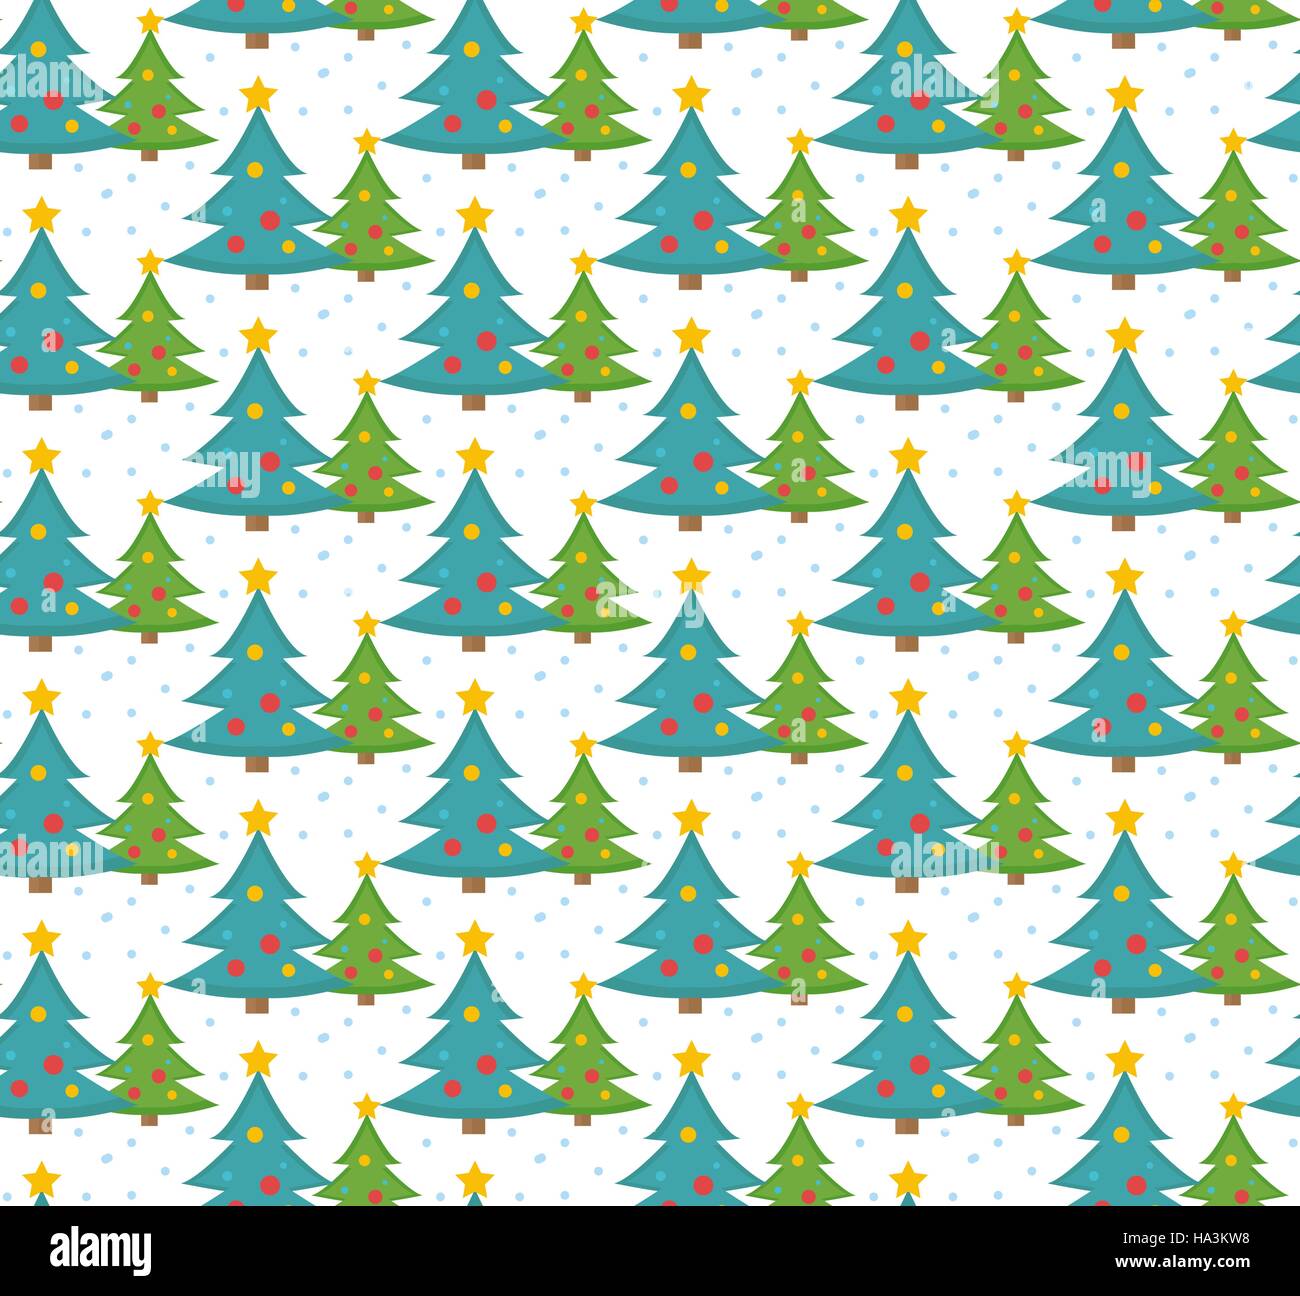 Christmas tree seamless pattern, endless background, texture. New Year s backdrop. Vector illustration Stock Vector